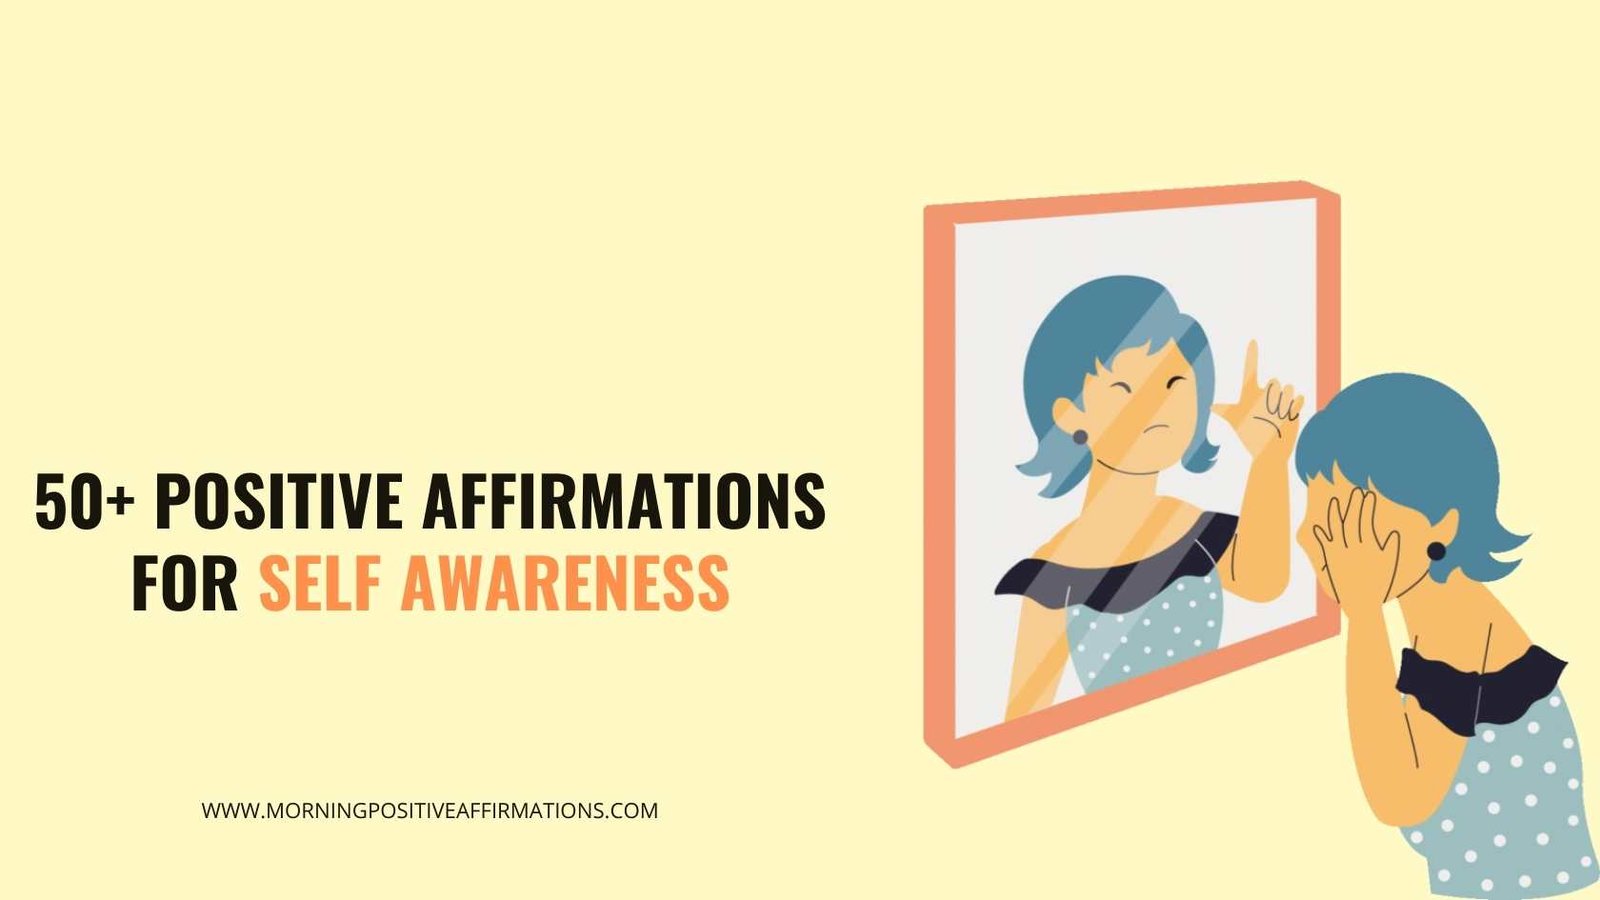 Positive Affirmations For Self Awareness